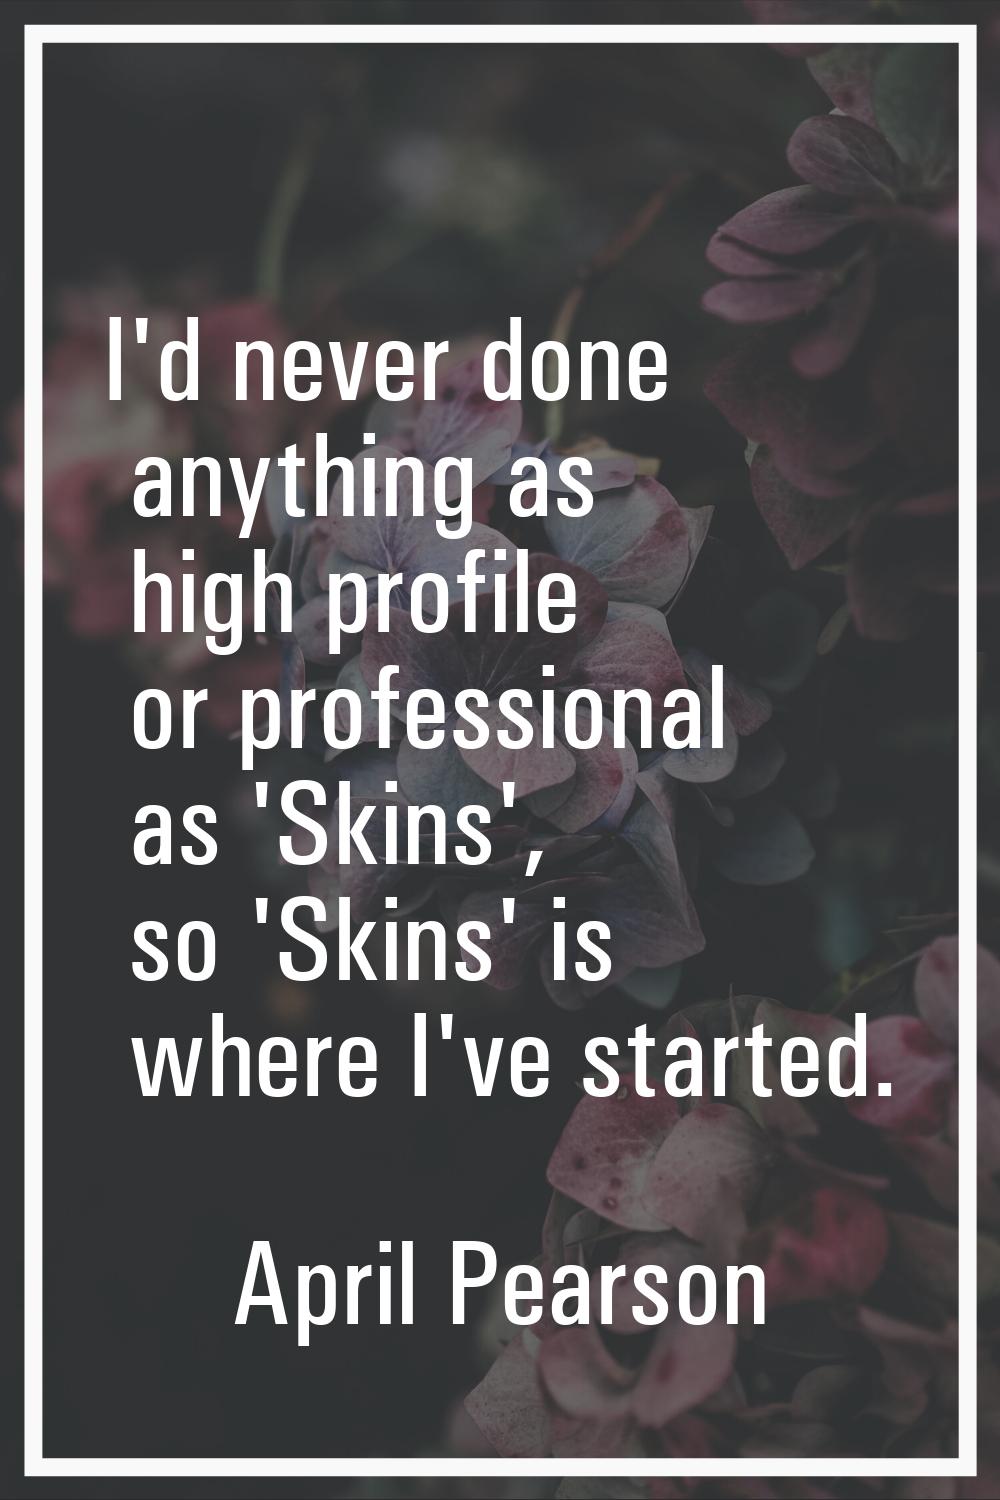 I'd never done anything as high profile or professional as 'Skins', so 'Skins' is where I've starte